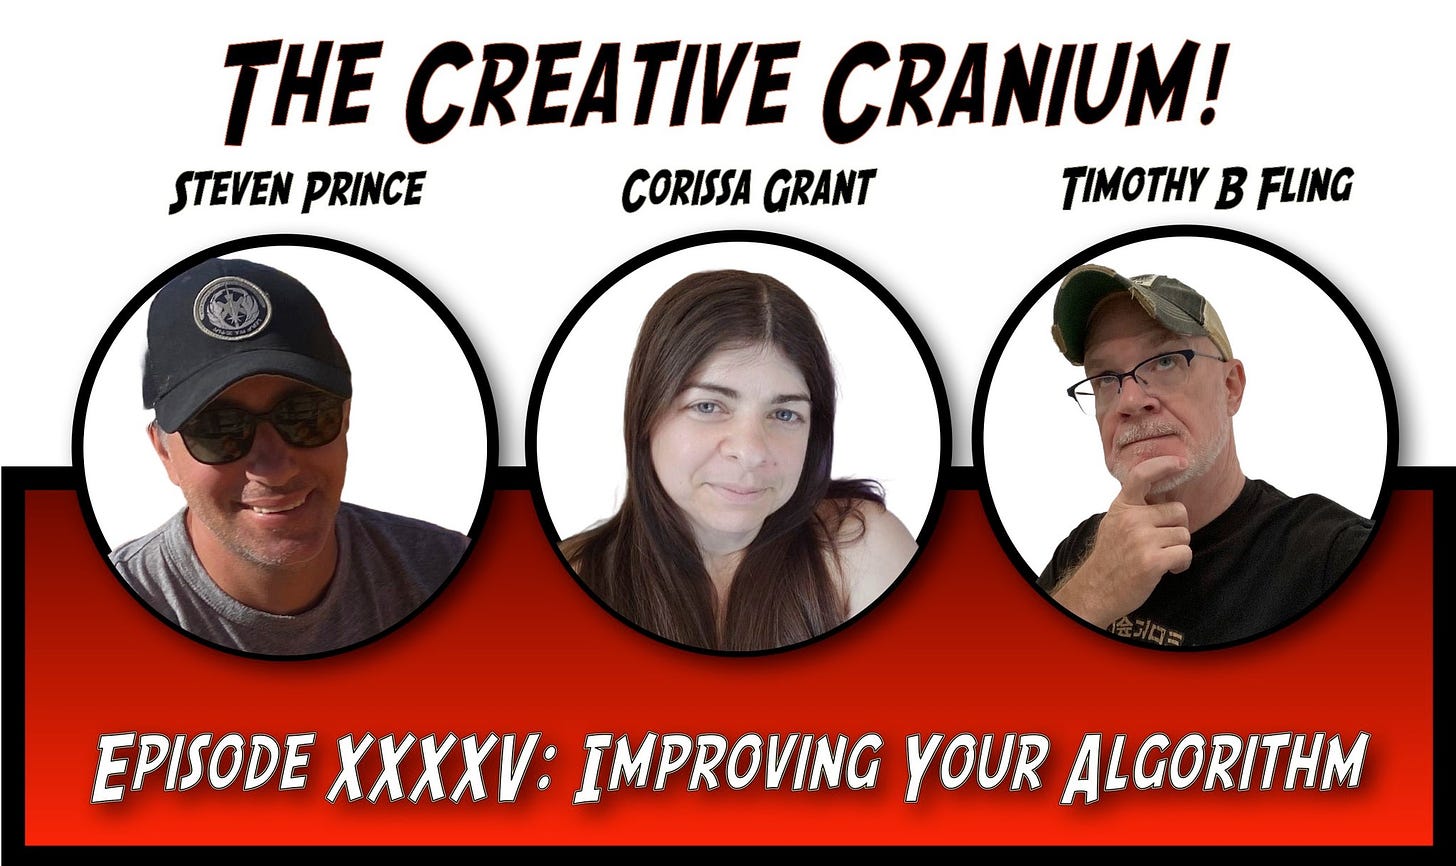 May be a graphic of 3 people and text that says "THE CREATIVE CRANIUM! STEVEN PRINCE CORISSA GRANT TIMOTHY B FLING EPISODE xXxxV: IMPROVING YOUR ALGORITHM"